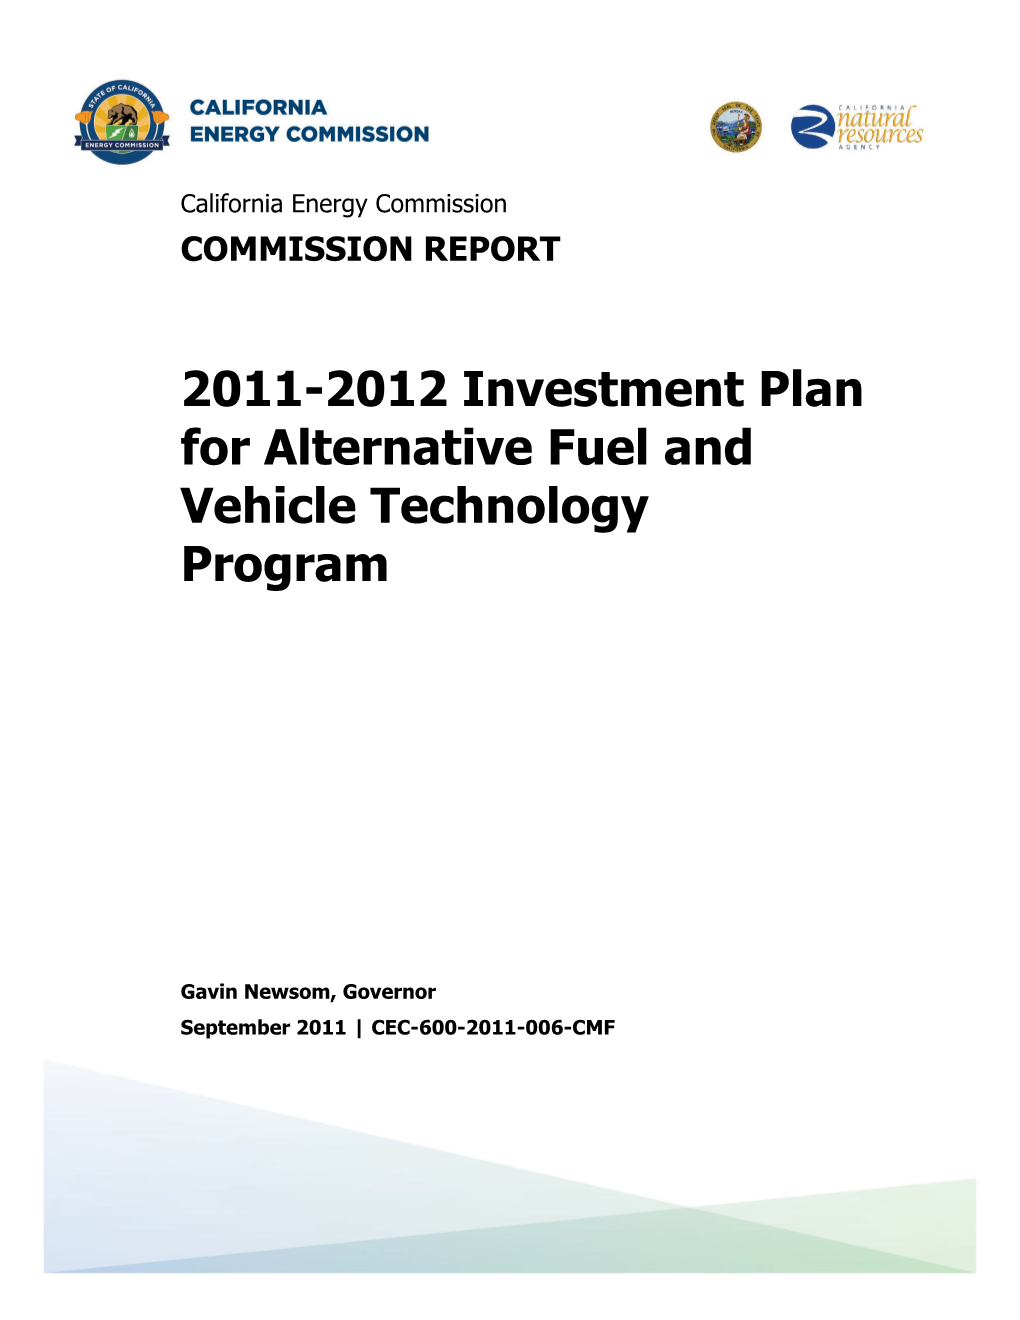 2011-2012 Investment Plan for Alternative Fuel and Vehicle Technology Program